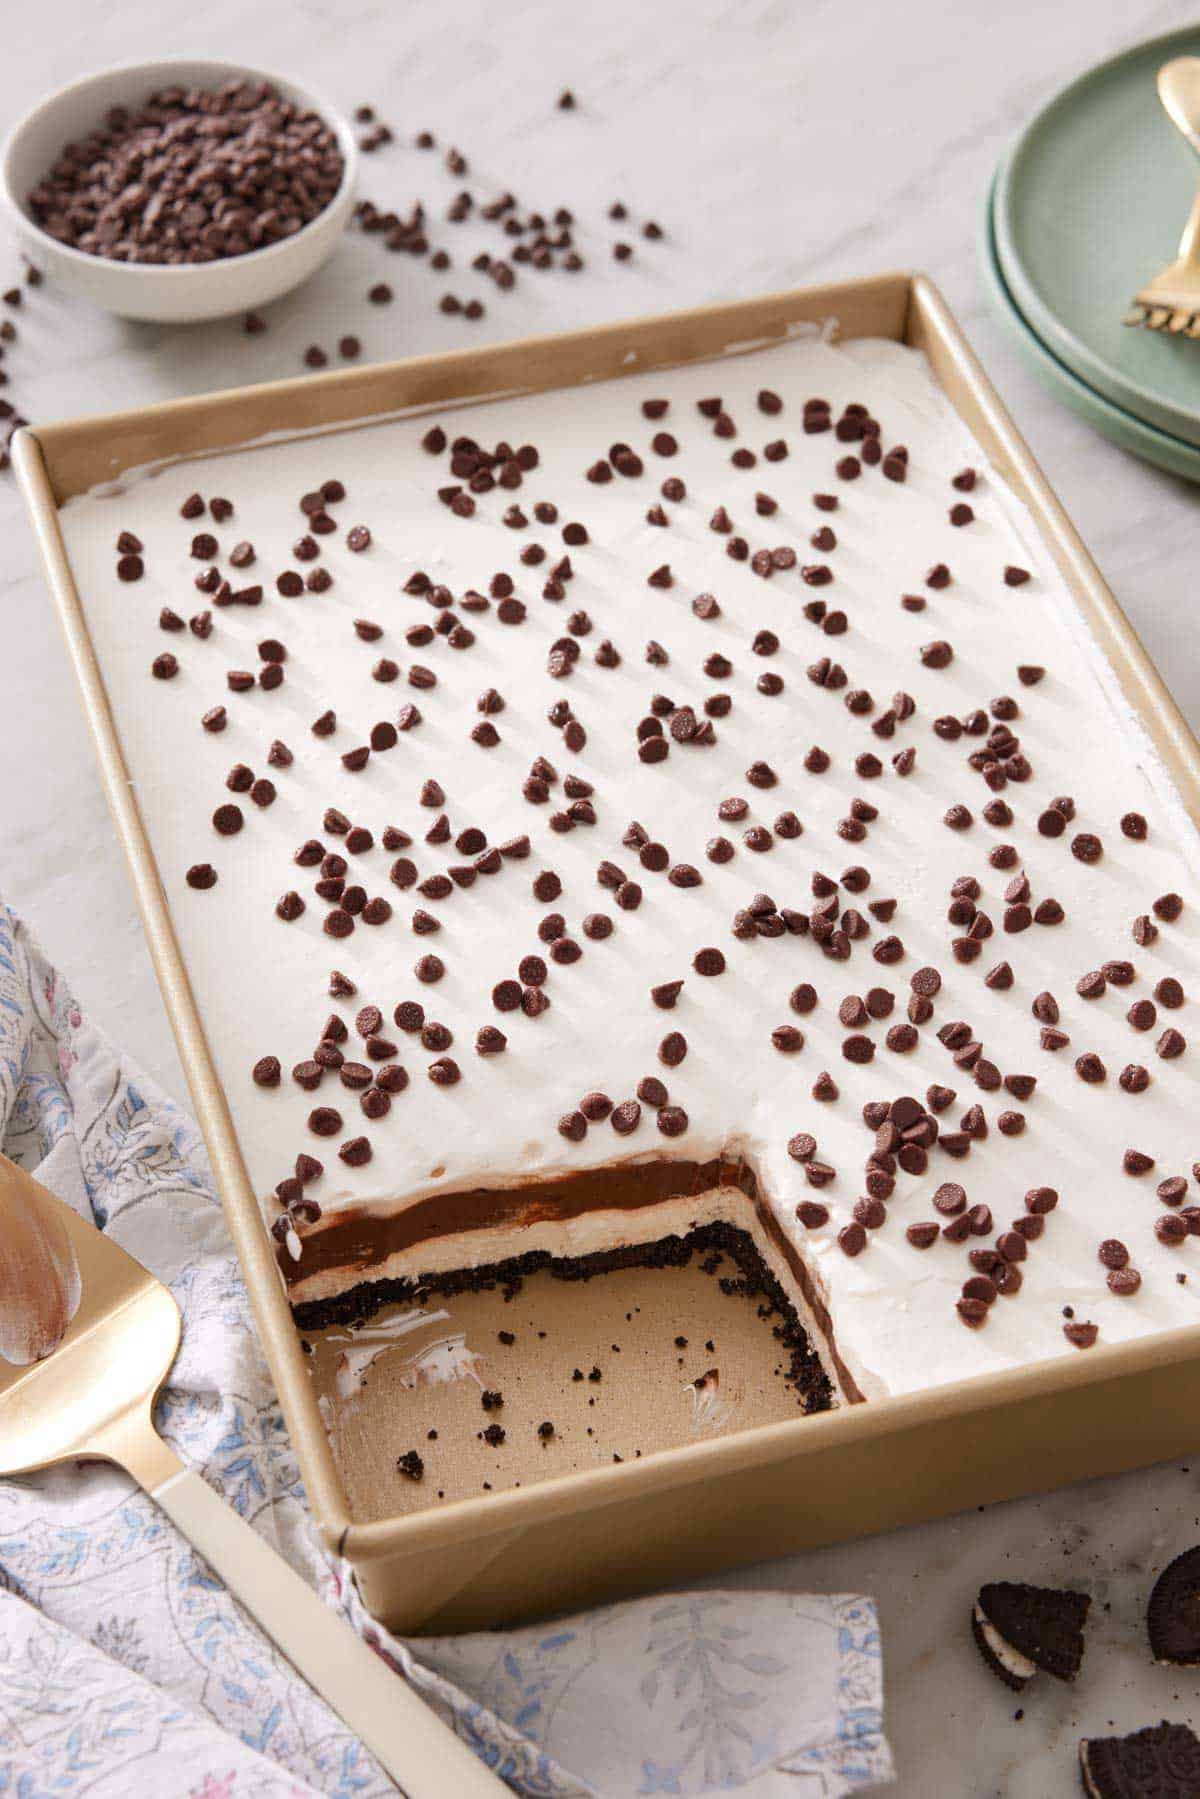 A rectangular pan of chocolate lasagna with a slice taken out. A bowl of chocolate chips in the background.